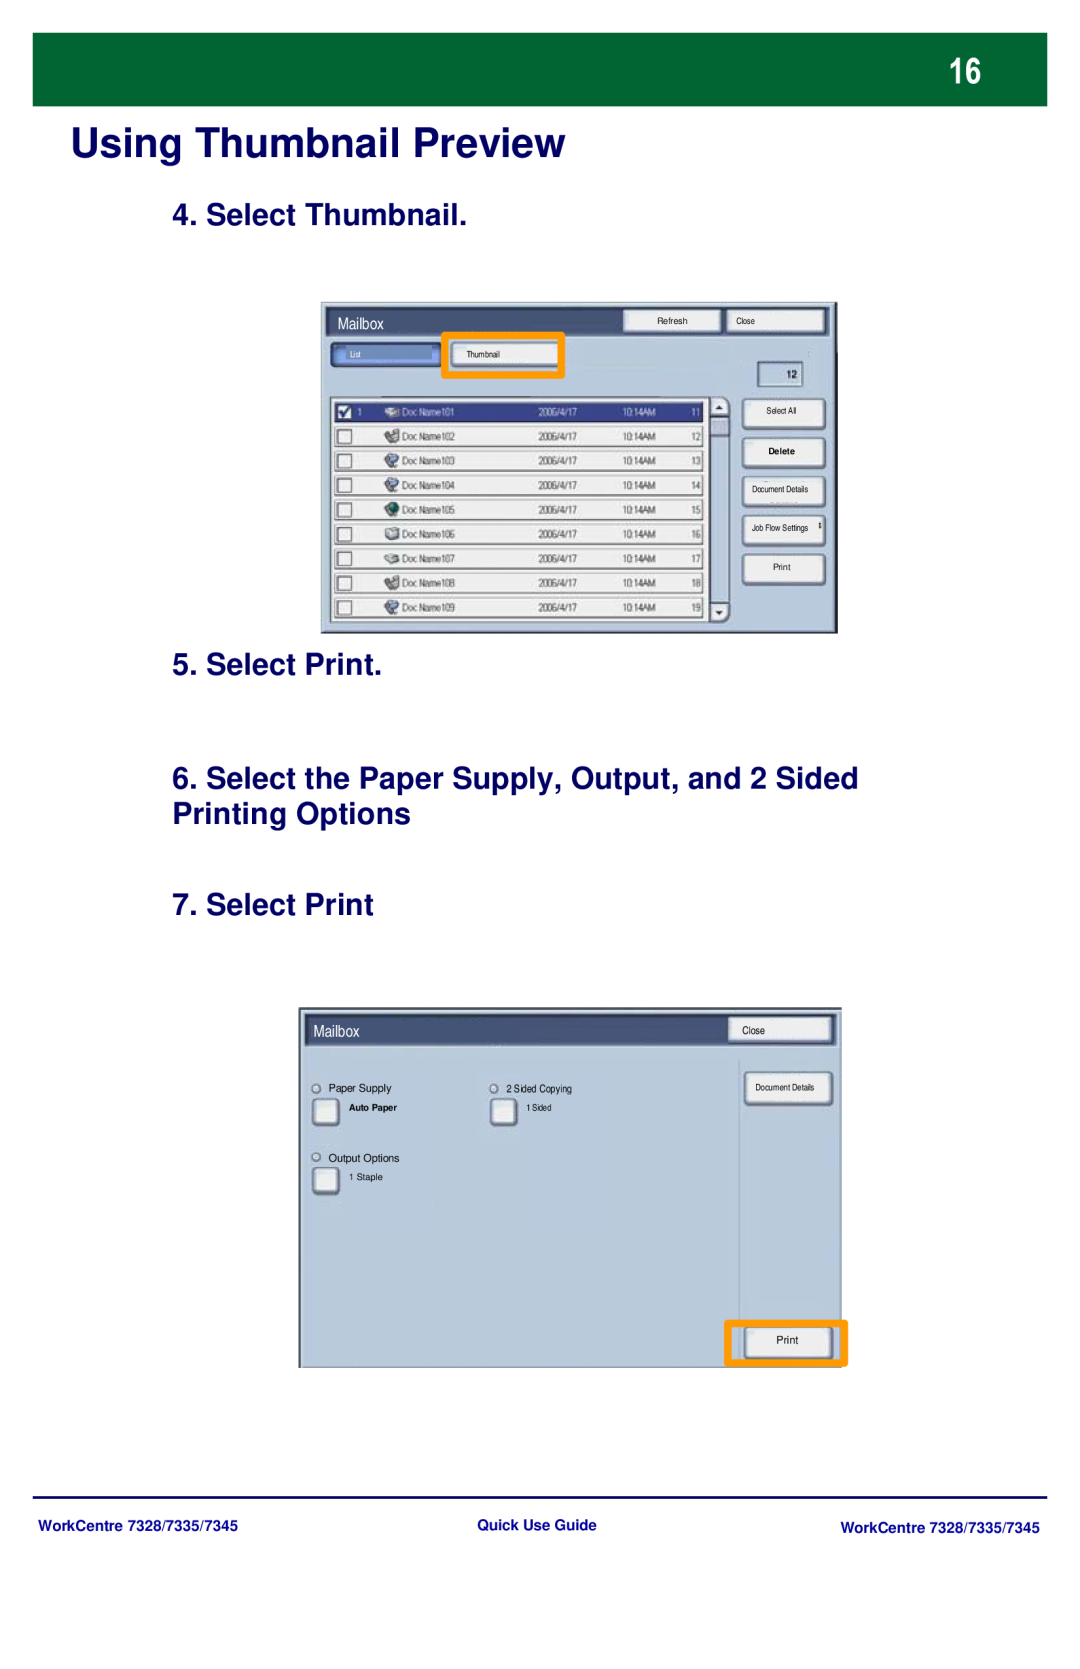 Xerox Using Thumbnail Preview, Select Thumbnail, Select Print, Mailbox, WorkCentre 7328/7335/7345, Quick Use Guide 